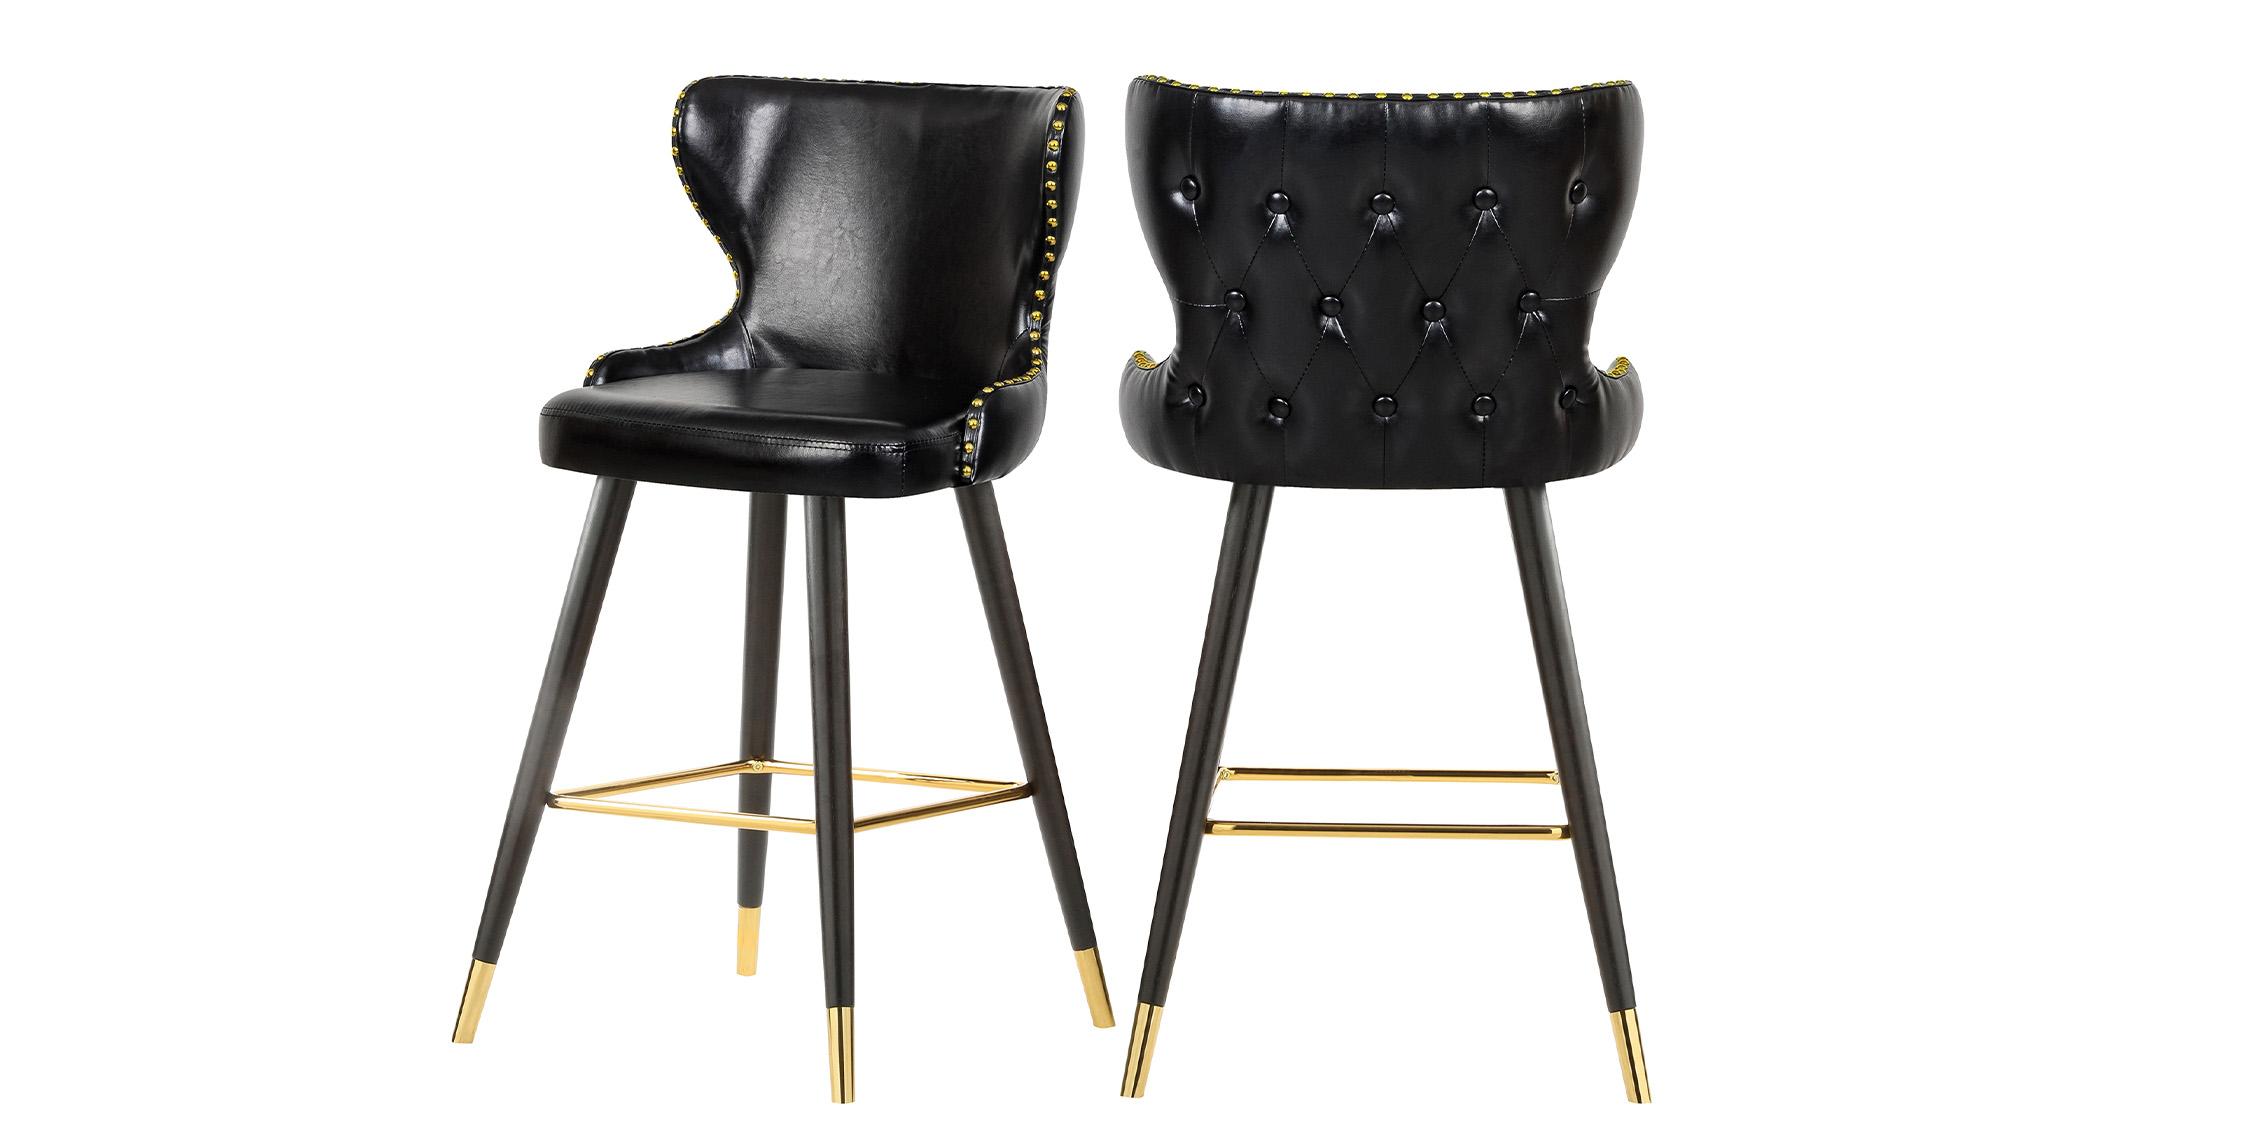 Contemporary, Modern Counter Stool Set HENDRIX 962Black-C 962Black-C in Black Faux Leather